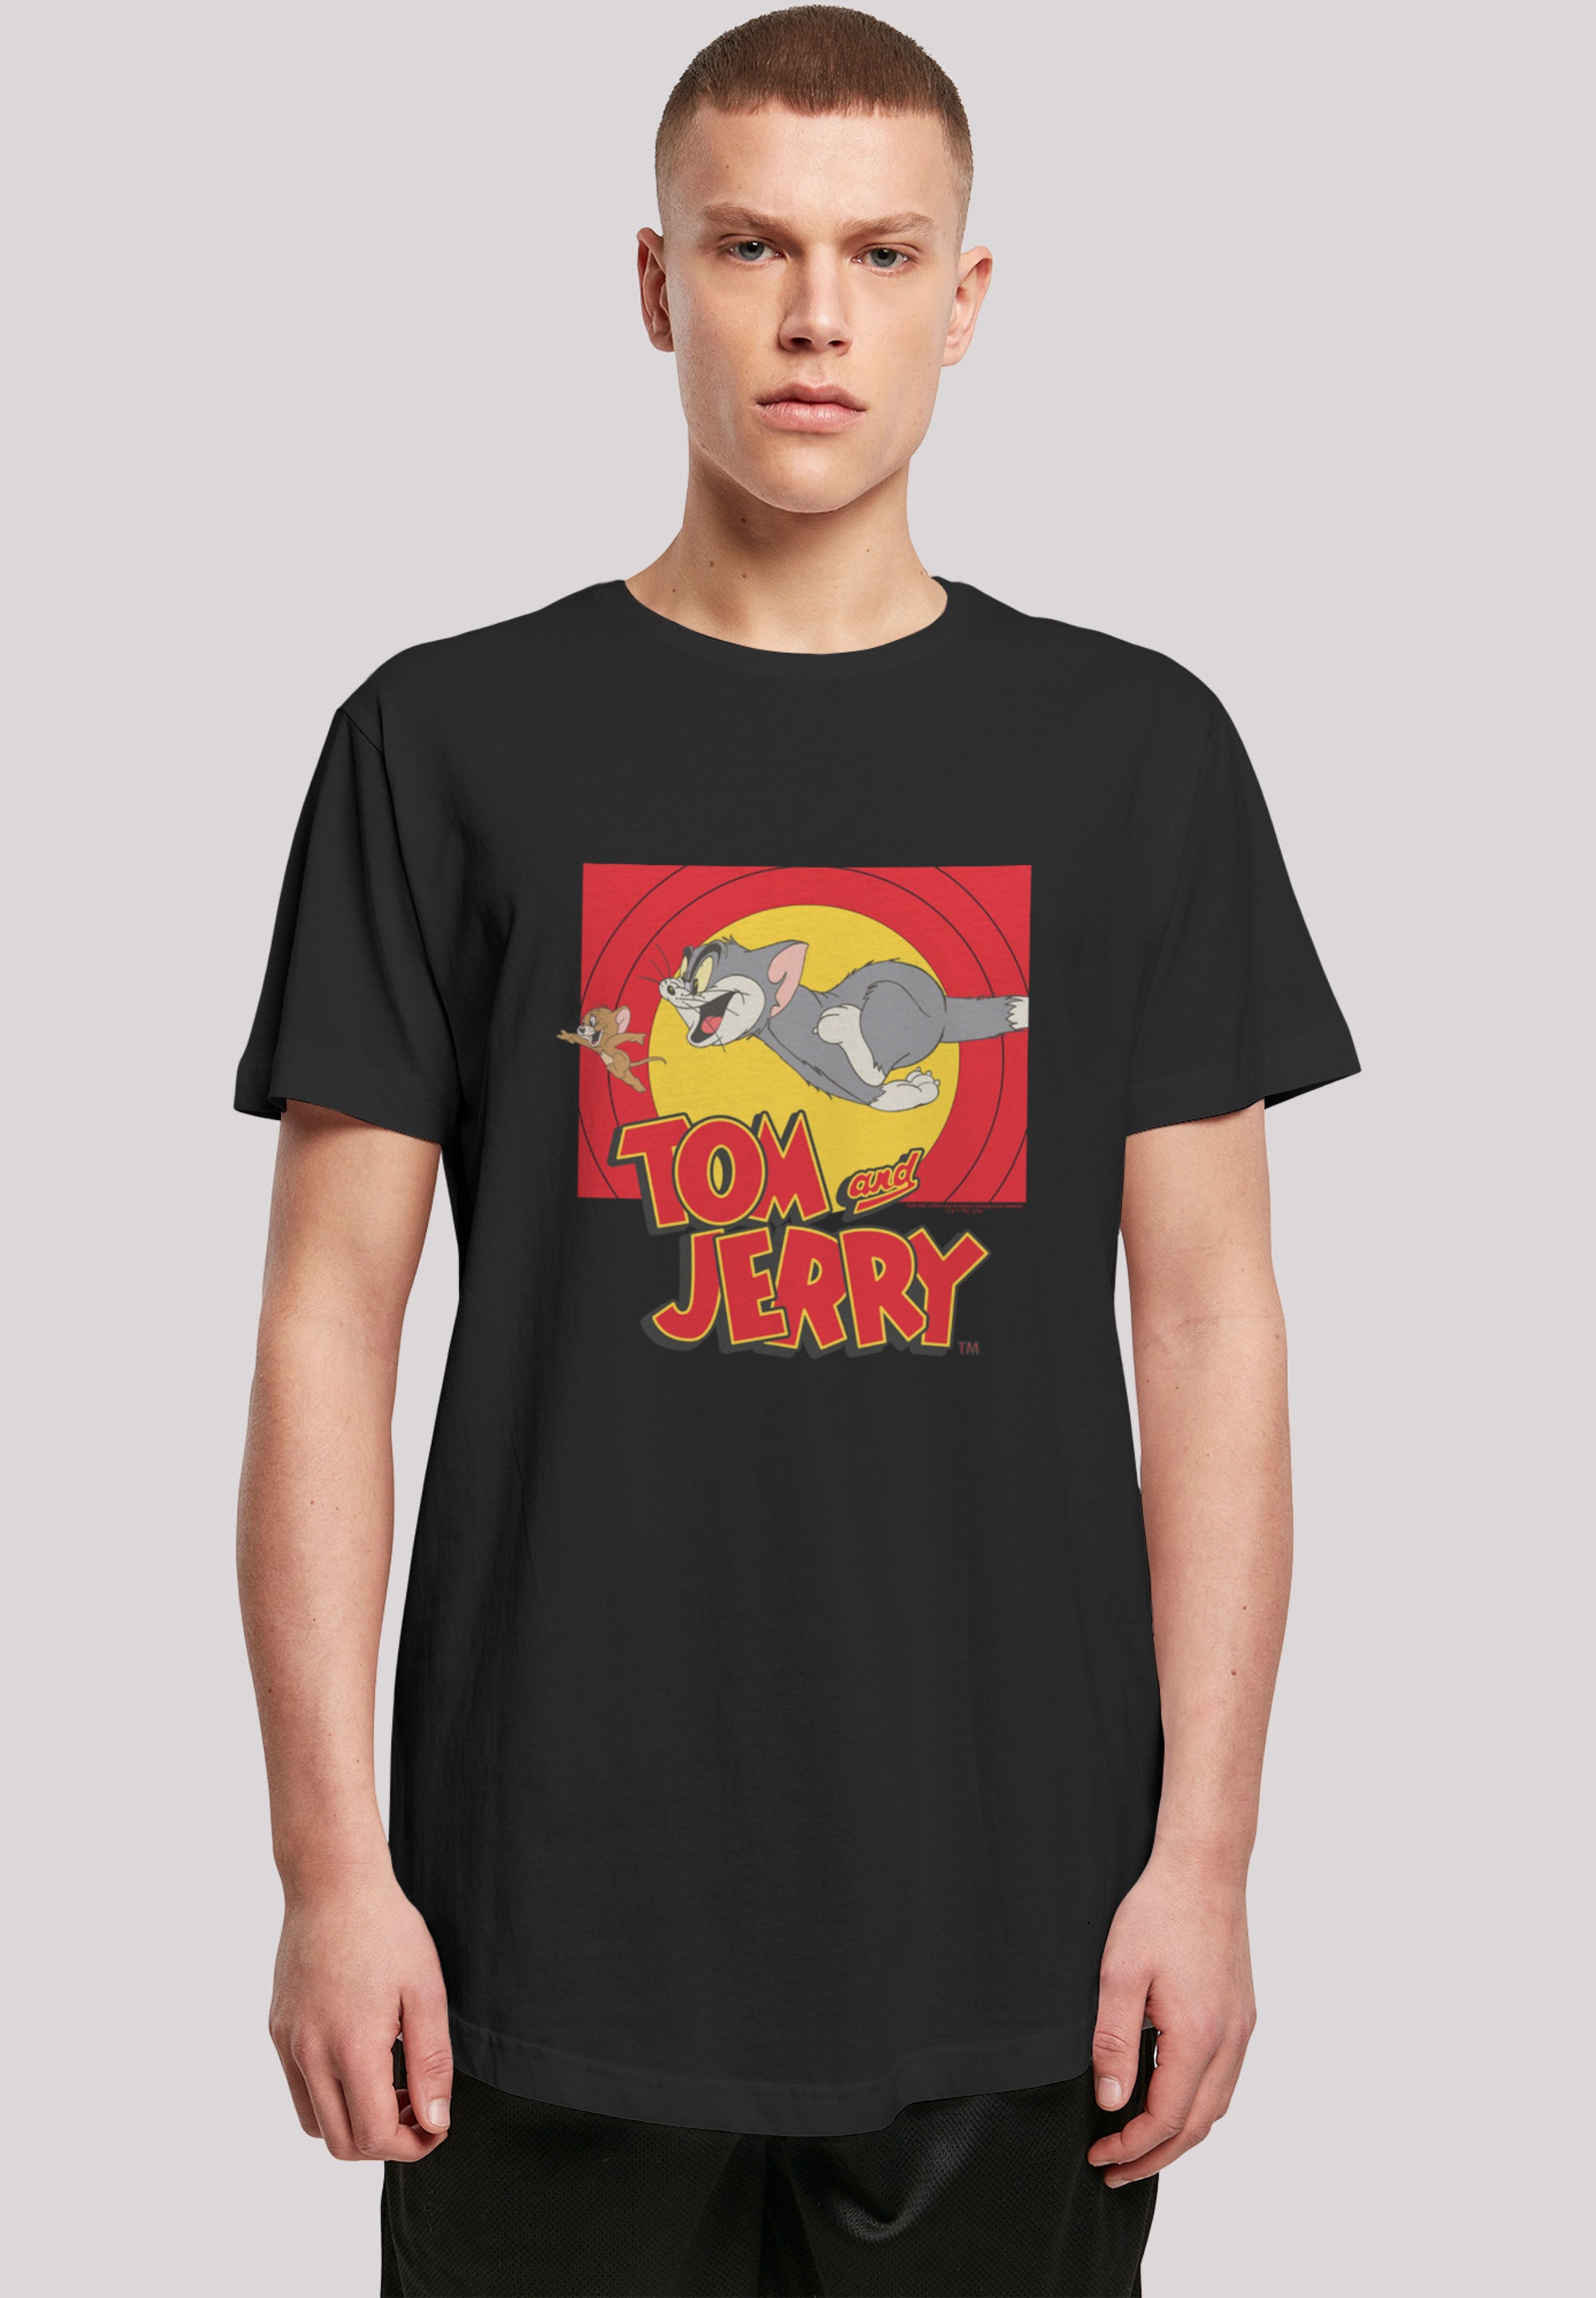 F4NT4STIC T-Shirt Chase Jerry für ▷ »Tom | Serie TV Print and BAUR Scene«